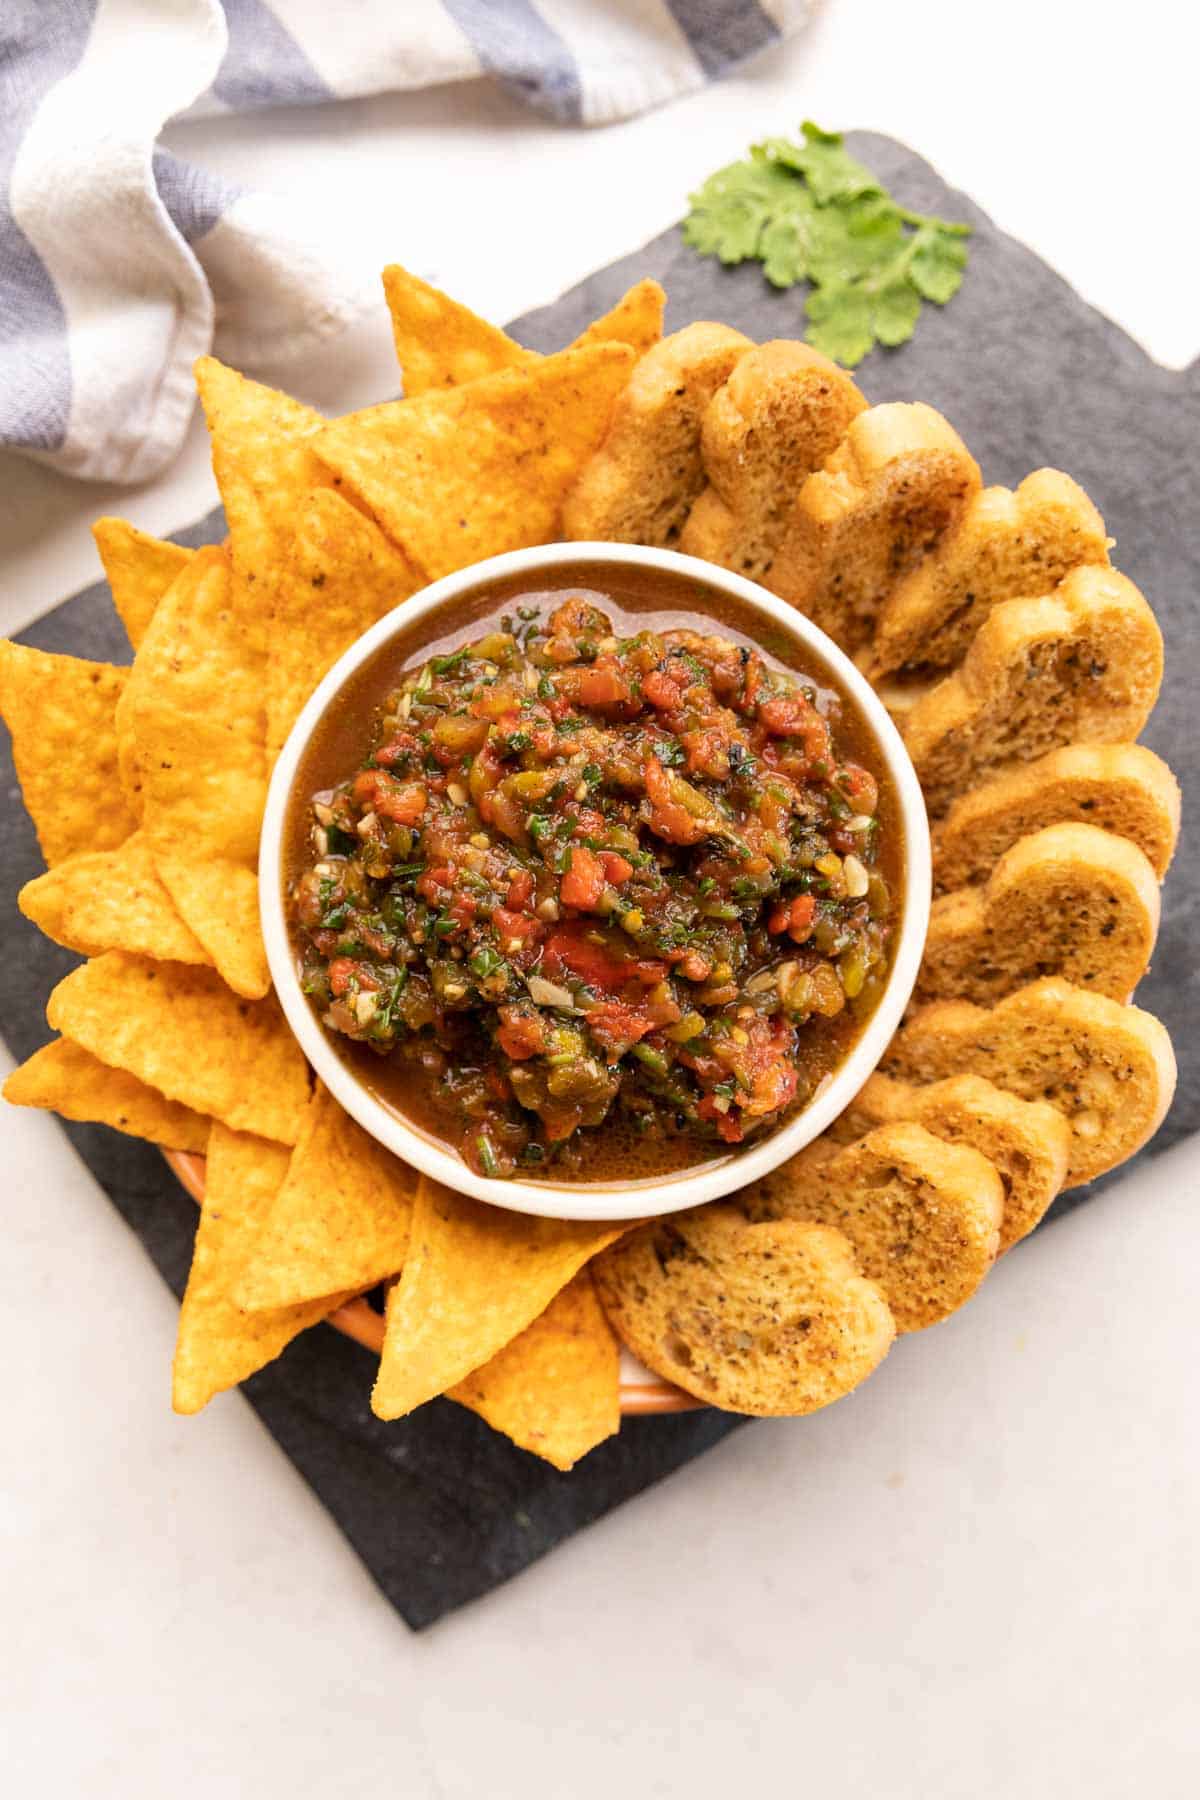 plate of nachos and crostini with a bowl of tomato salsa in the middle 